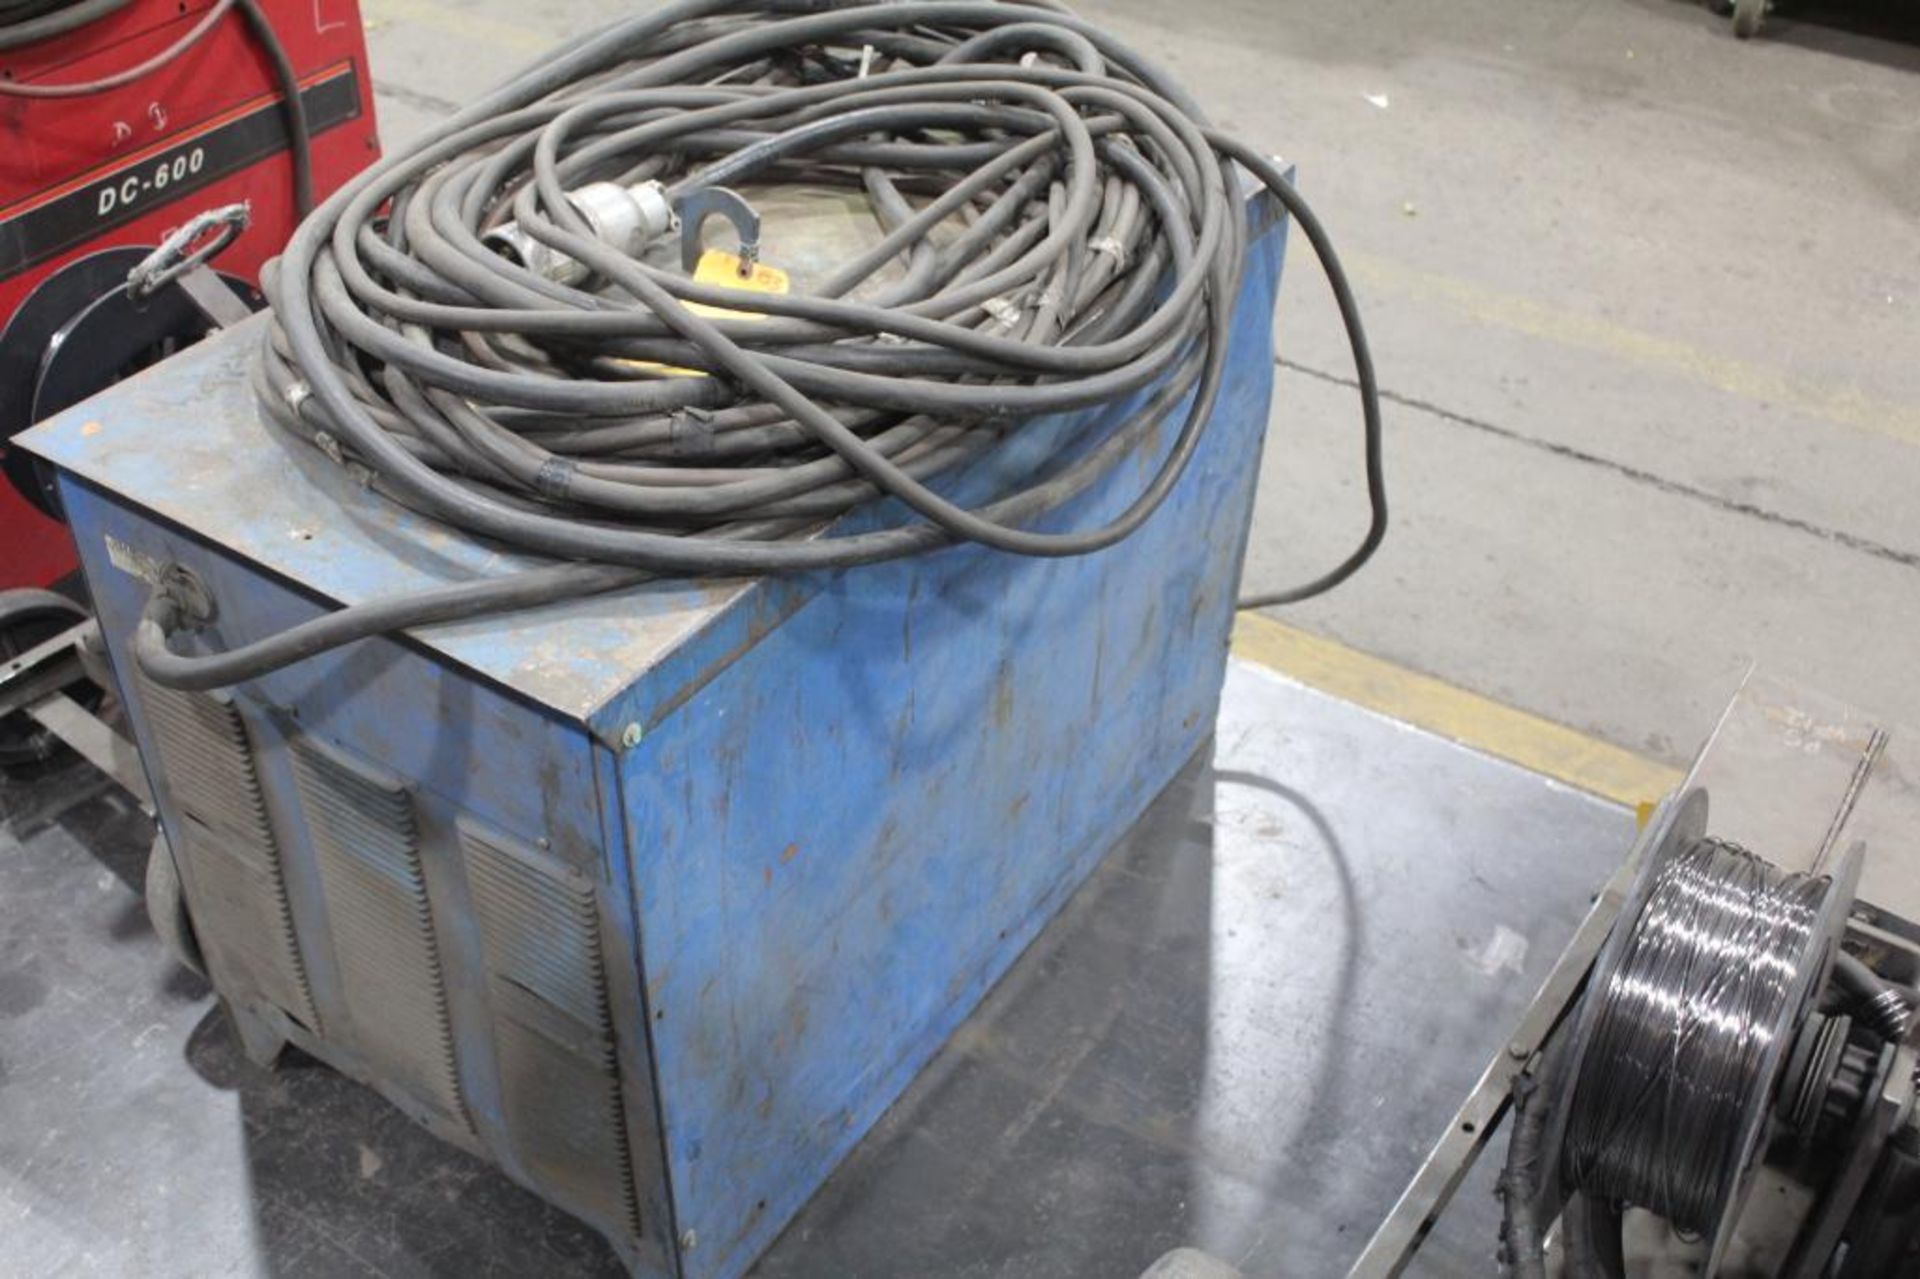 LINCOLN ELECTRIC IDEALARC DC-600 WELDER SN.AC684483 230-460V WITH LN-8 WIRE FEED SN.U1110613415 - Image 3 of 11